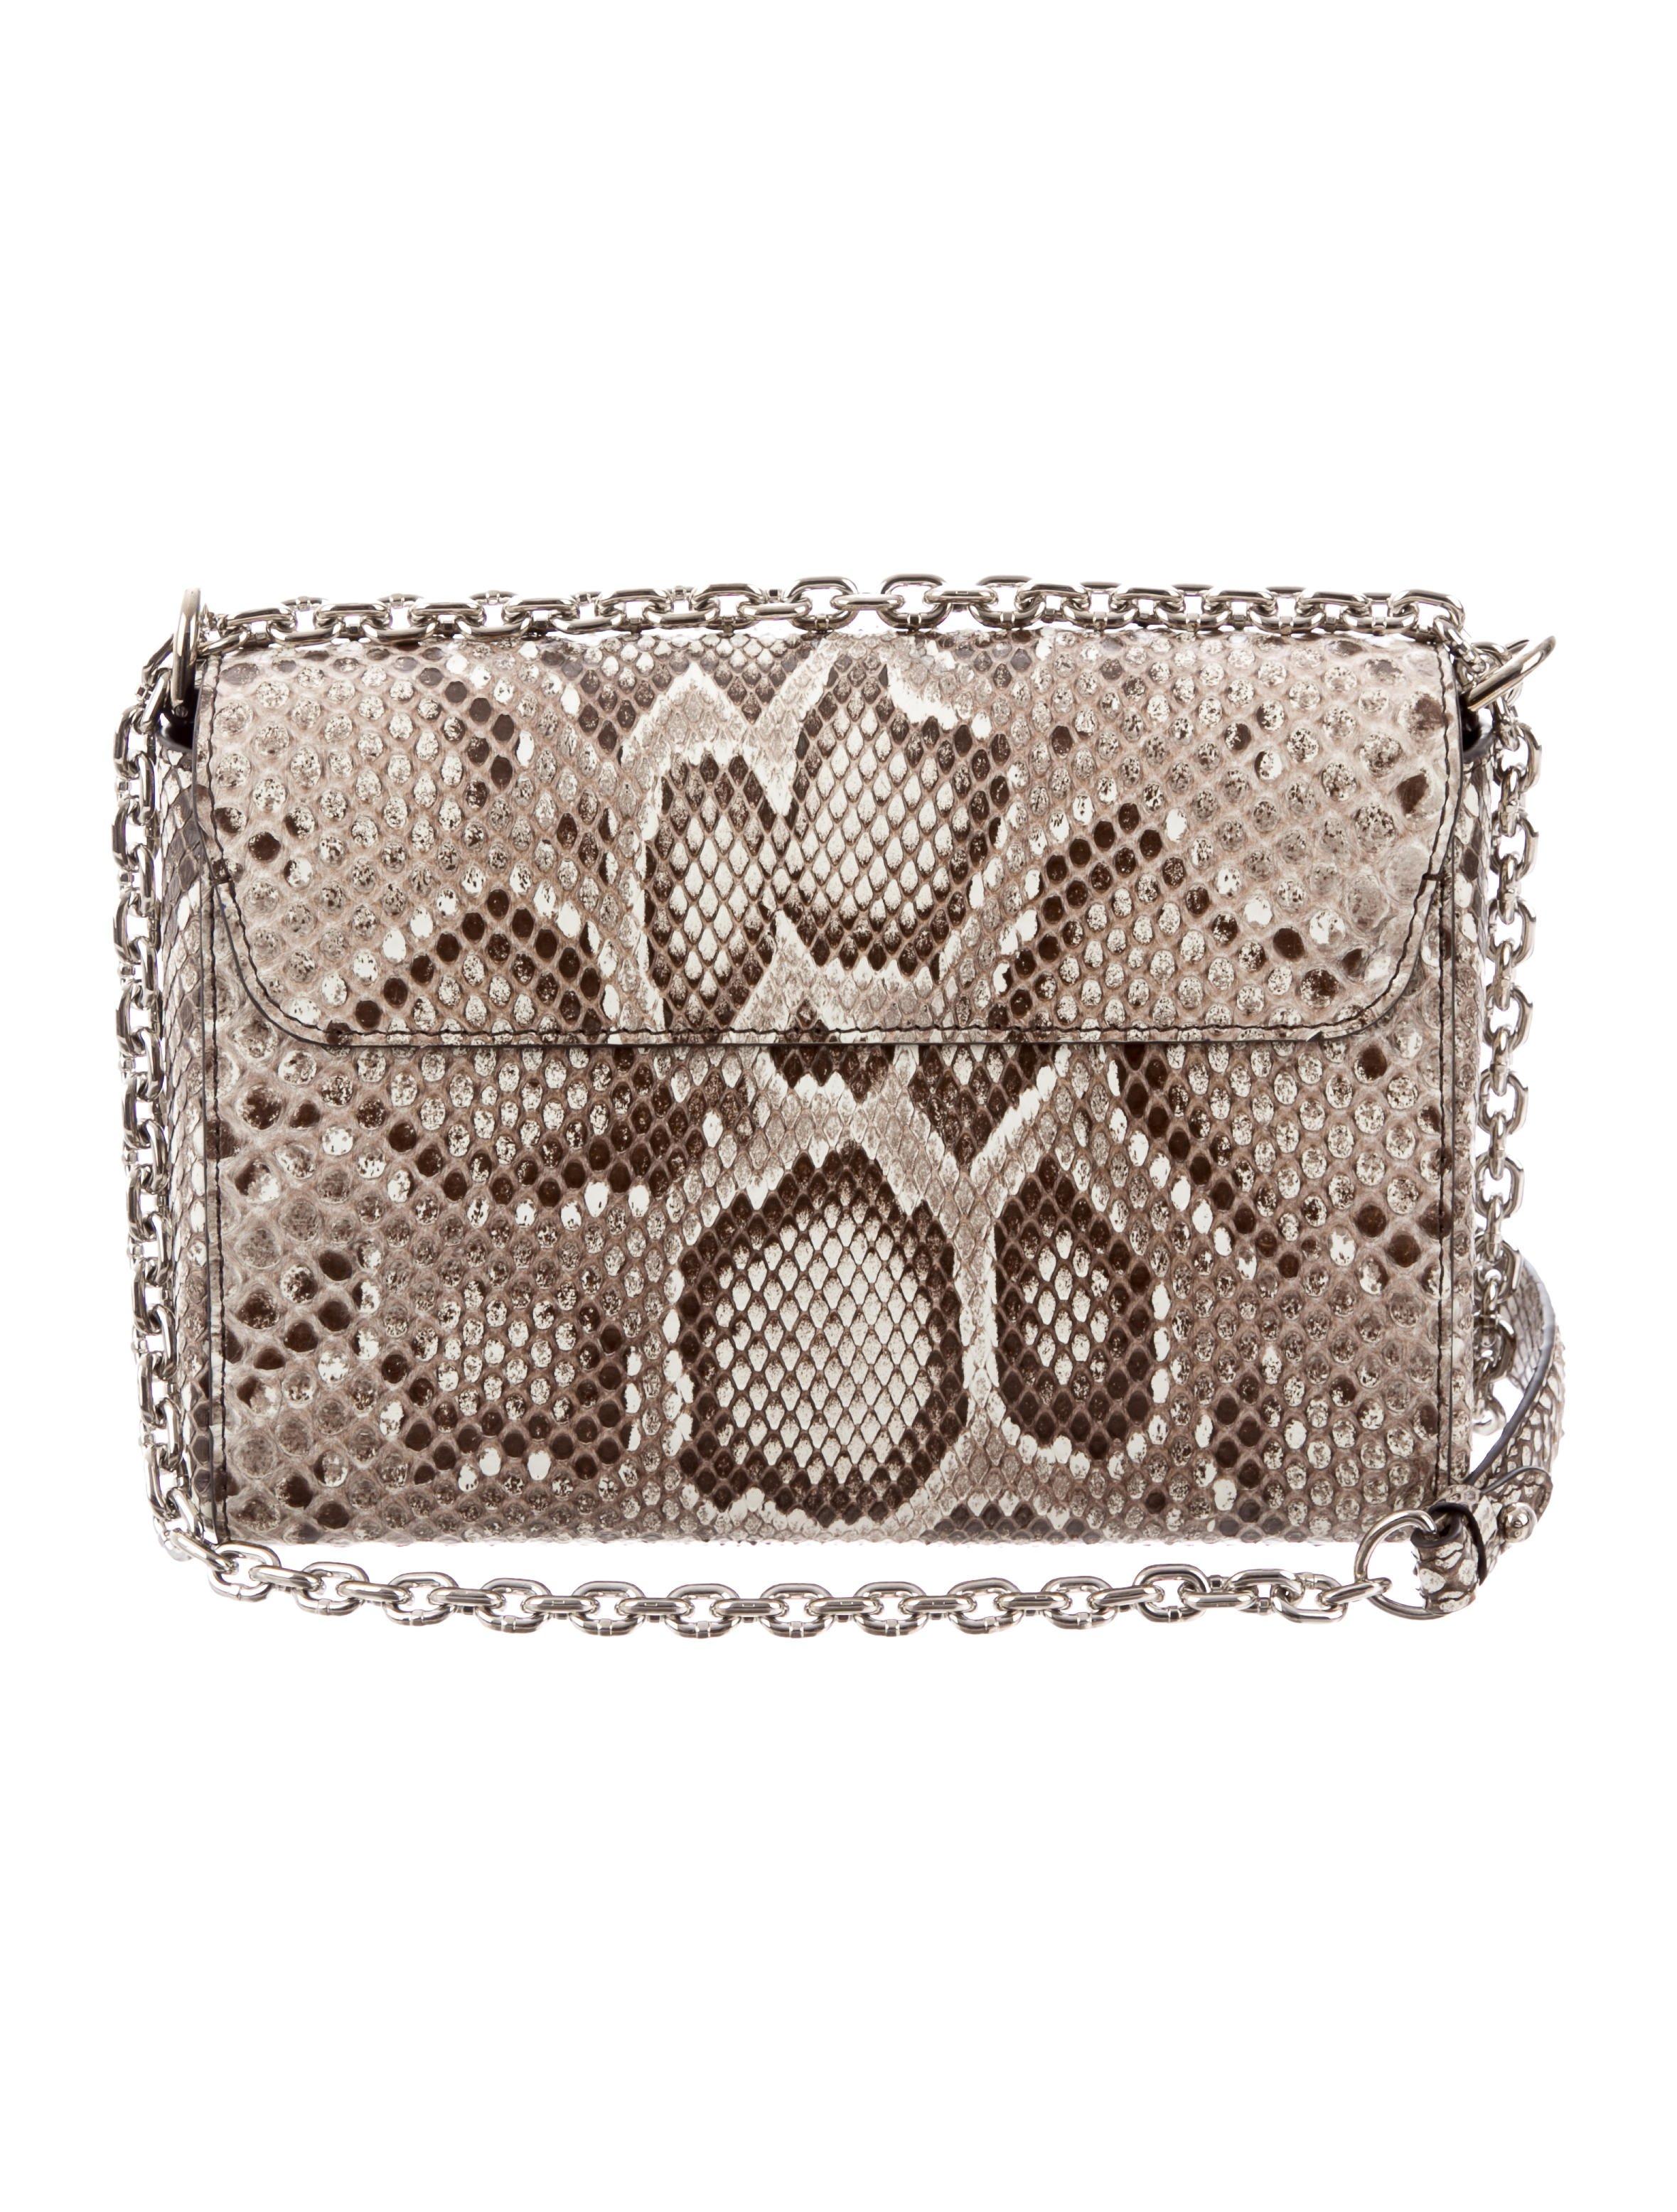 Louis Vuitton NEW Snakeskin Silver 'LV' Chain Clutch Shoulder Flap Bag in Box

Snakeskin (Python)
Silver tone hardware
Leather lining
Turn-lock closure
Date code present
Made in France
Shoulder strap drop 21